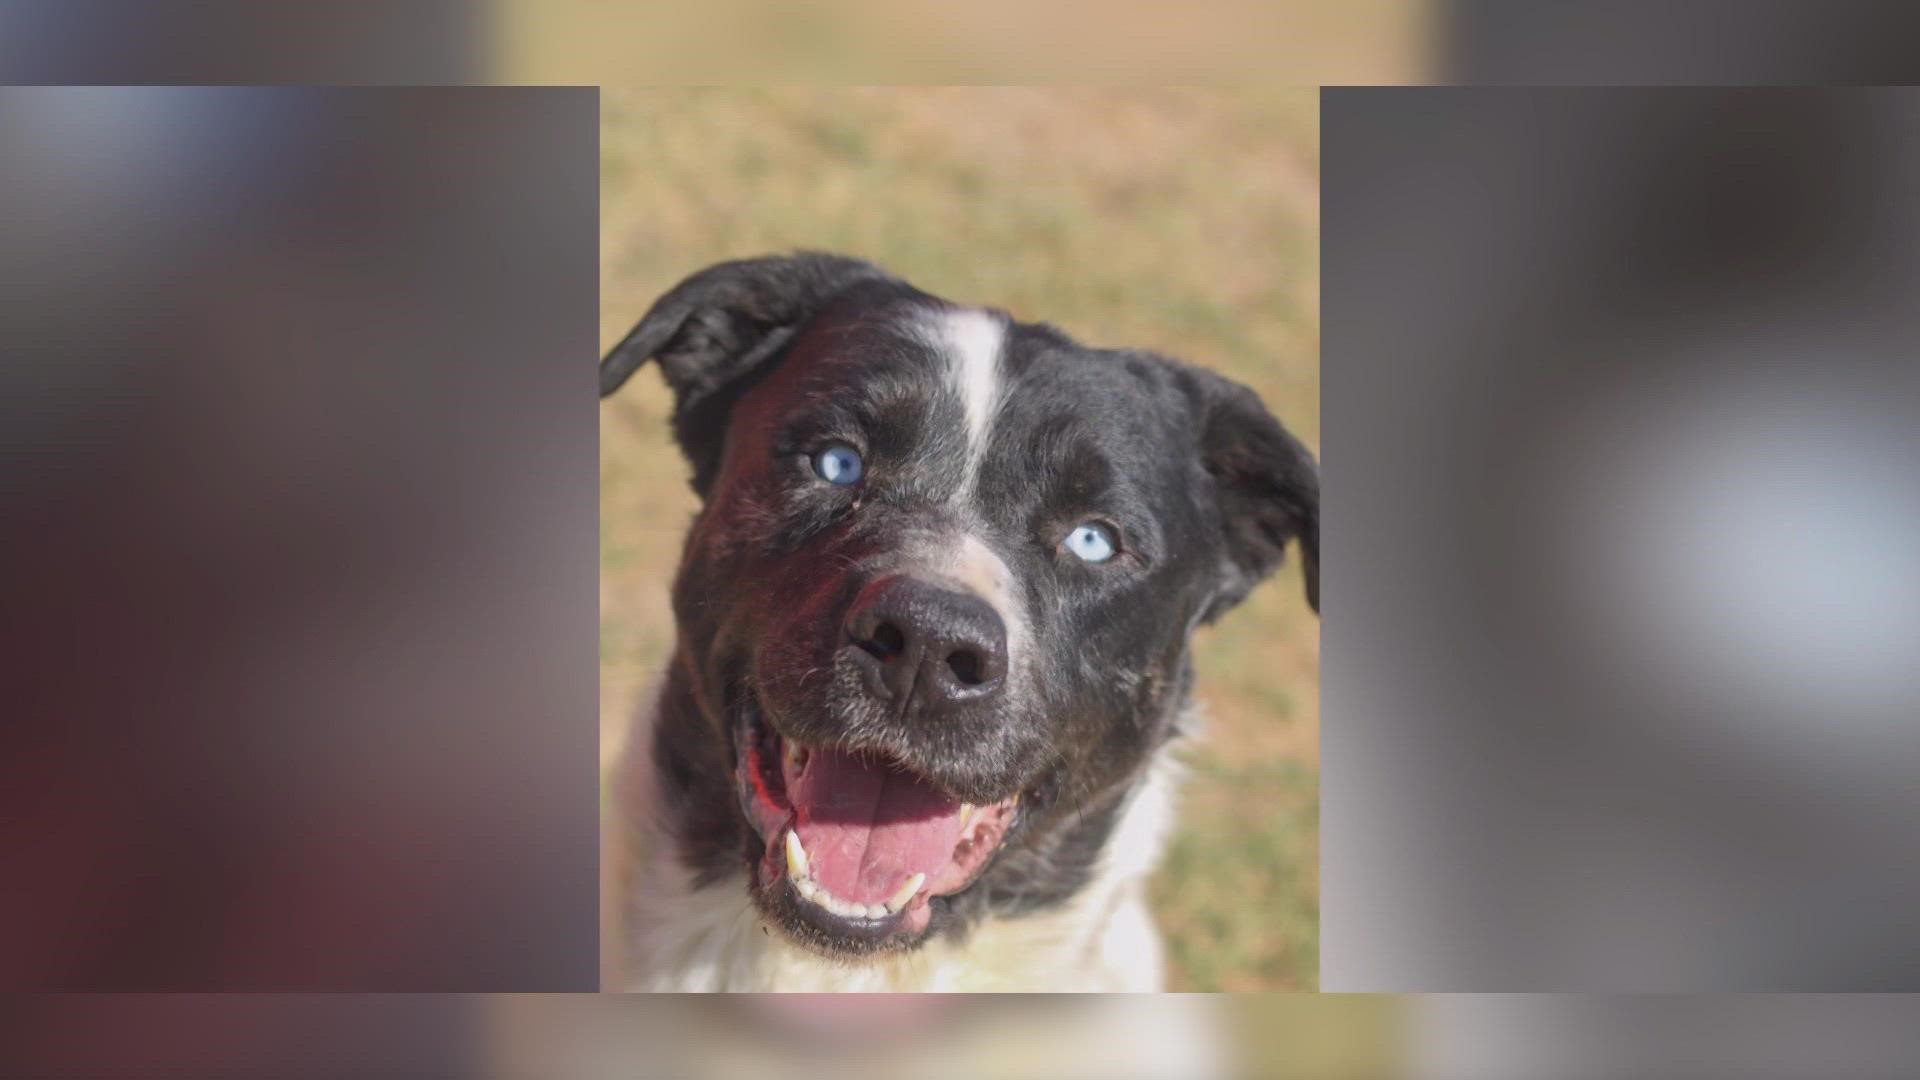 He is a 3-year-old Catahoula mix who is getting anxious in the kennel setting and just wants someone to love him.